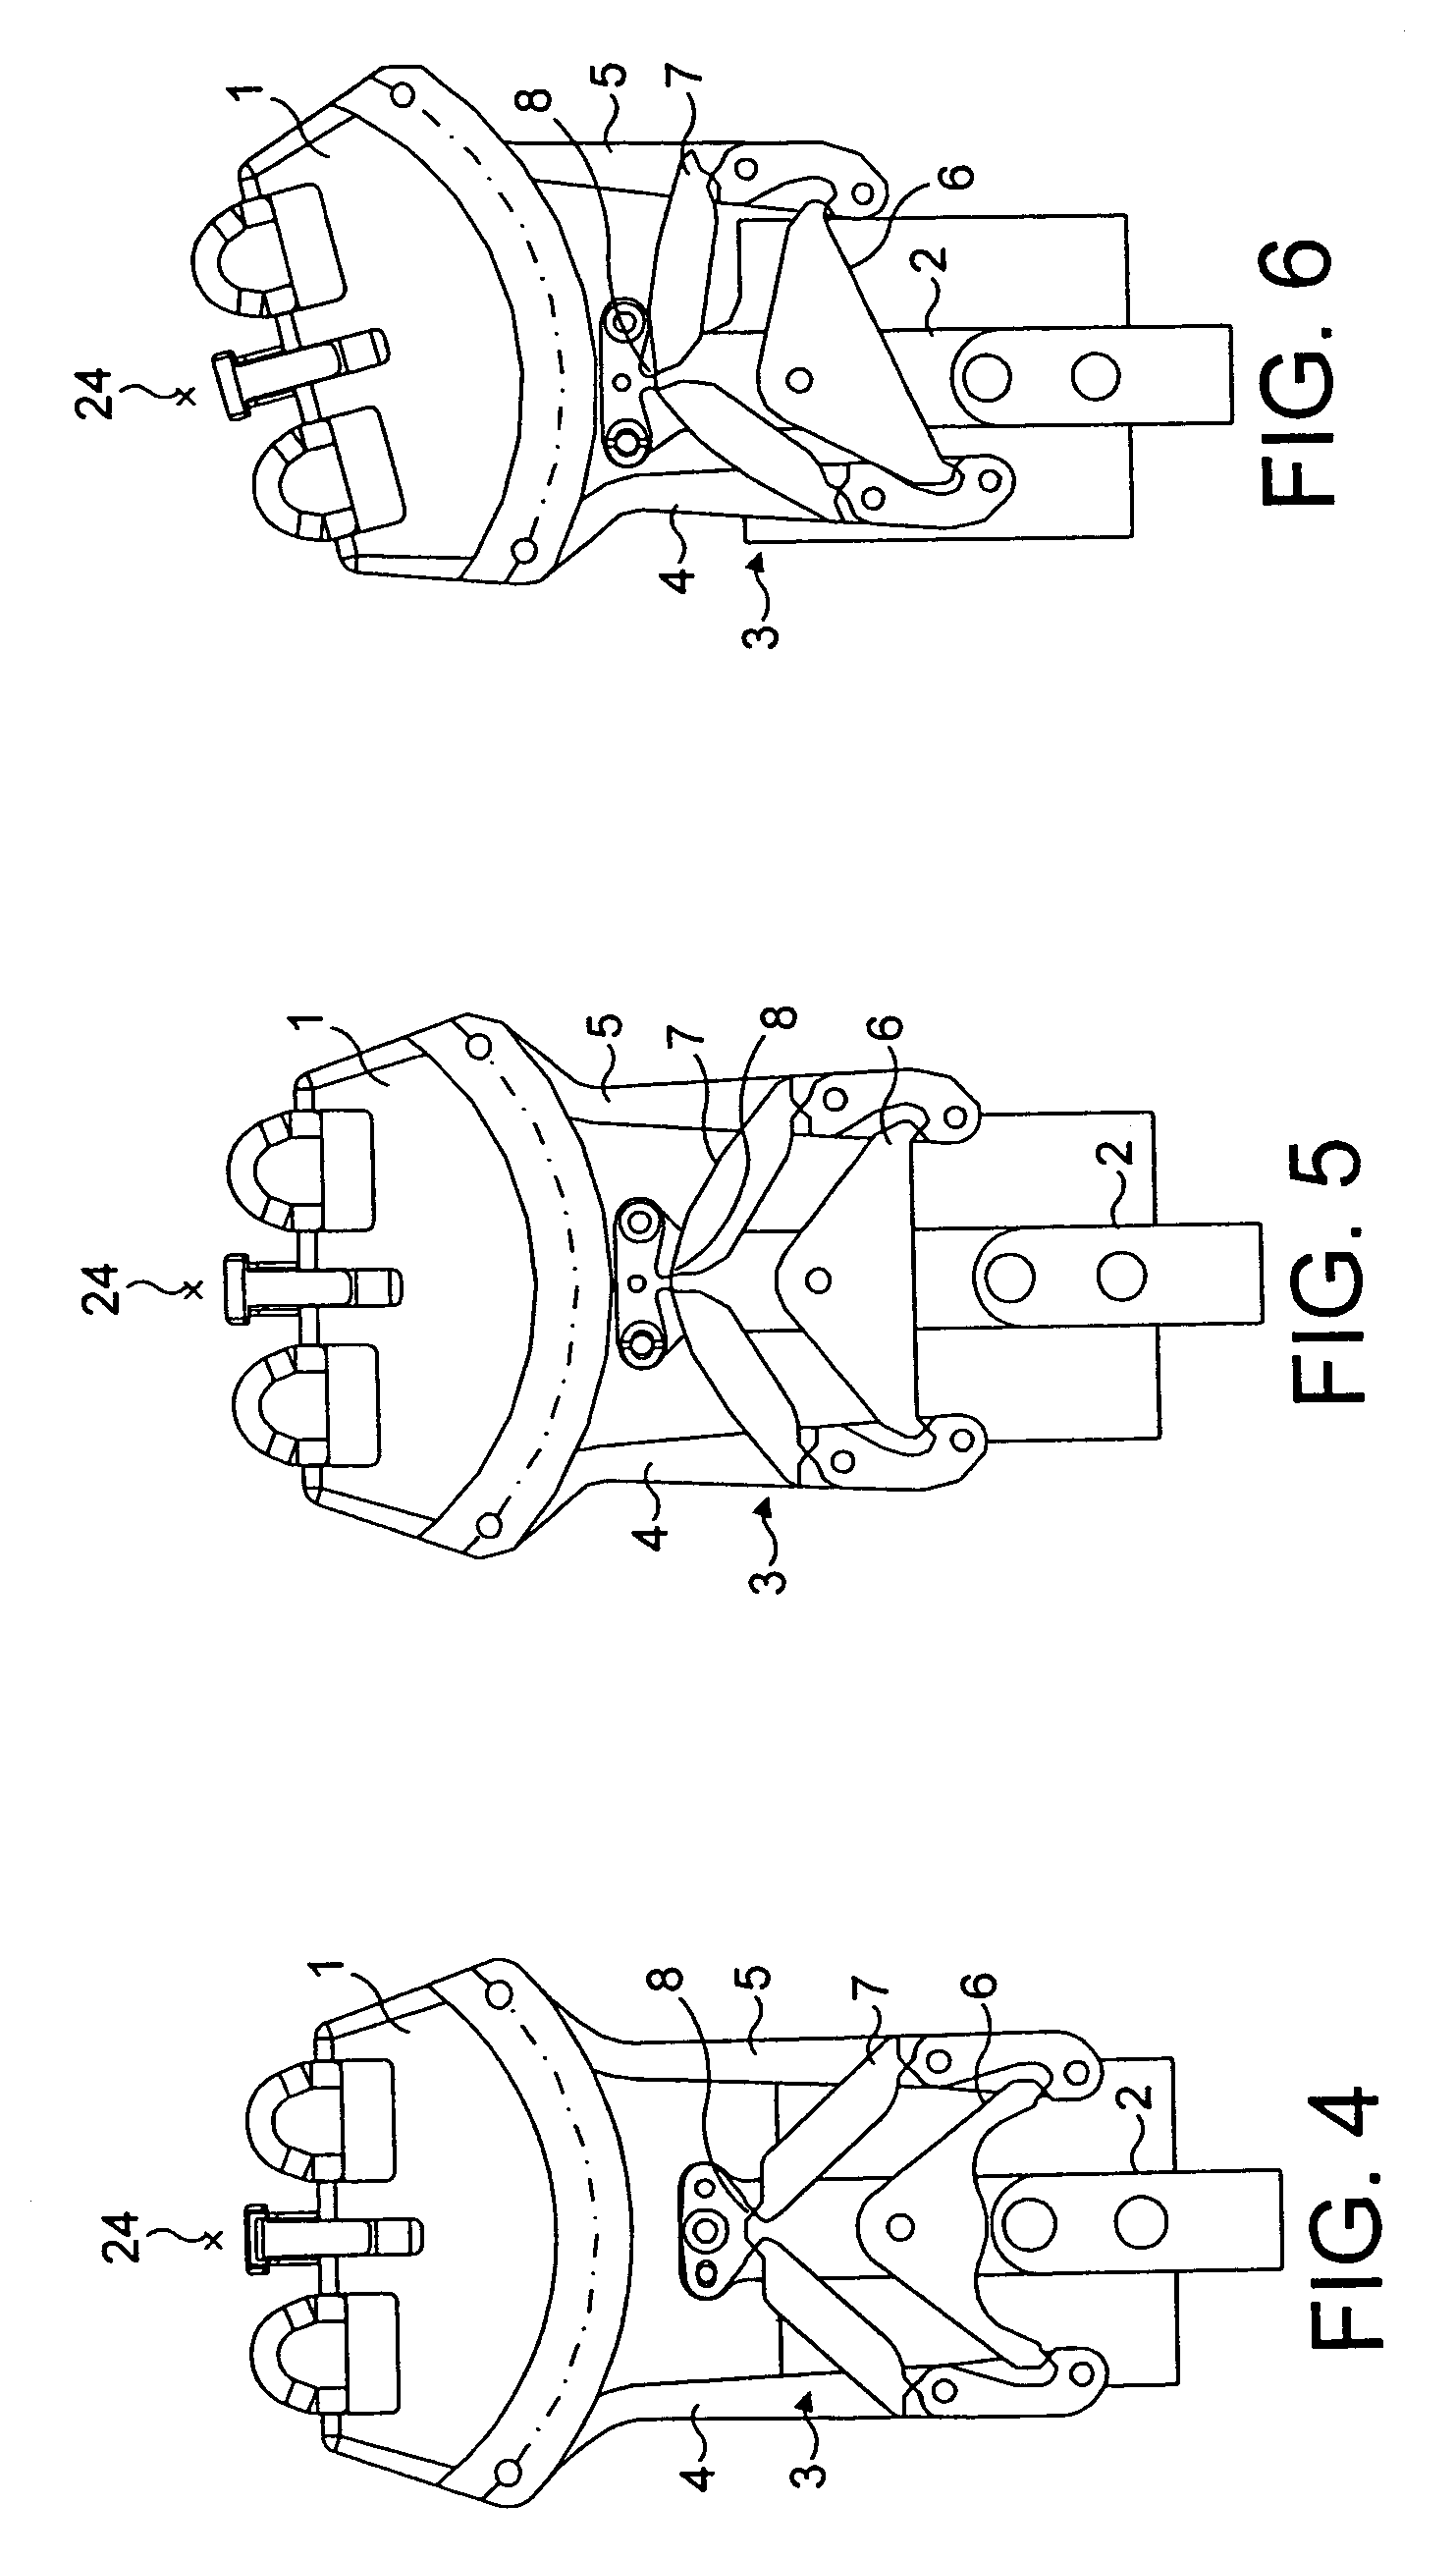 Linkage mechanism providing a virtual pivot axis for hair removal apparatus with pivotal head